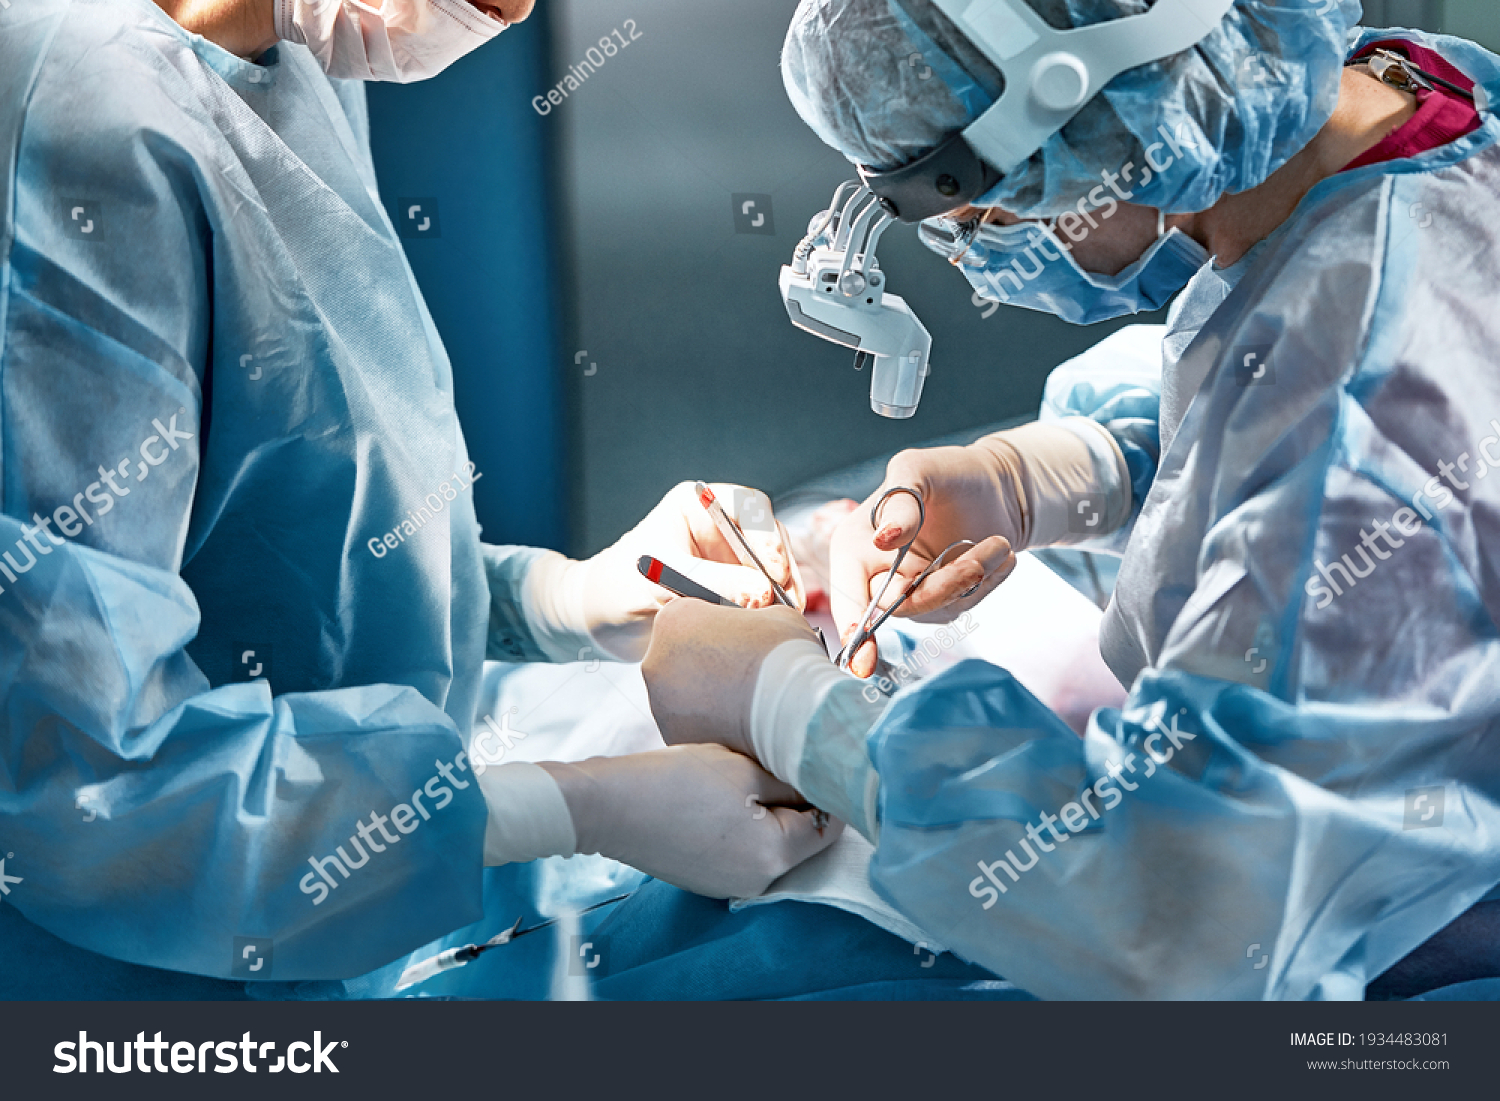 Rhinoplasty men, the surgeons gloved hands hold the instruments during nose surgery Doctor in gloves holds medical instrument during rhinoplasty #1934483081